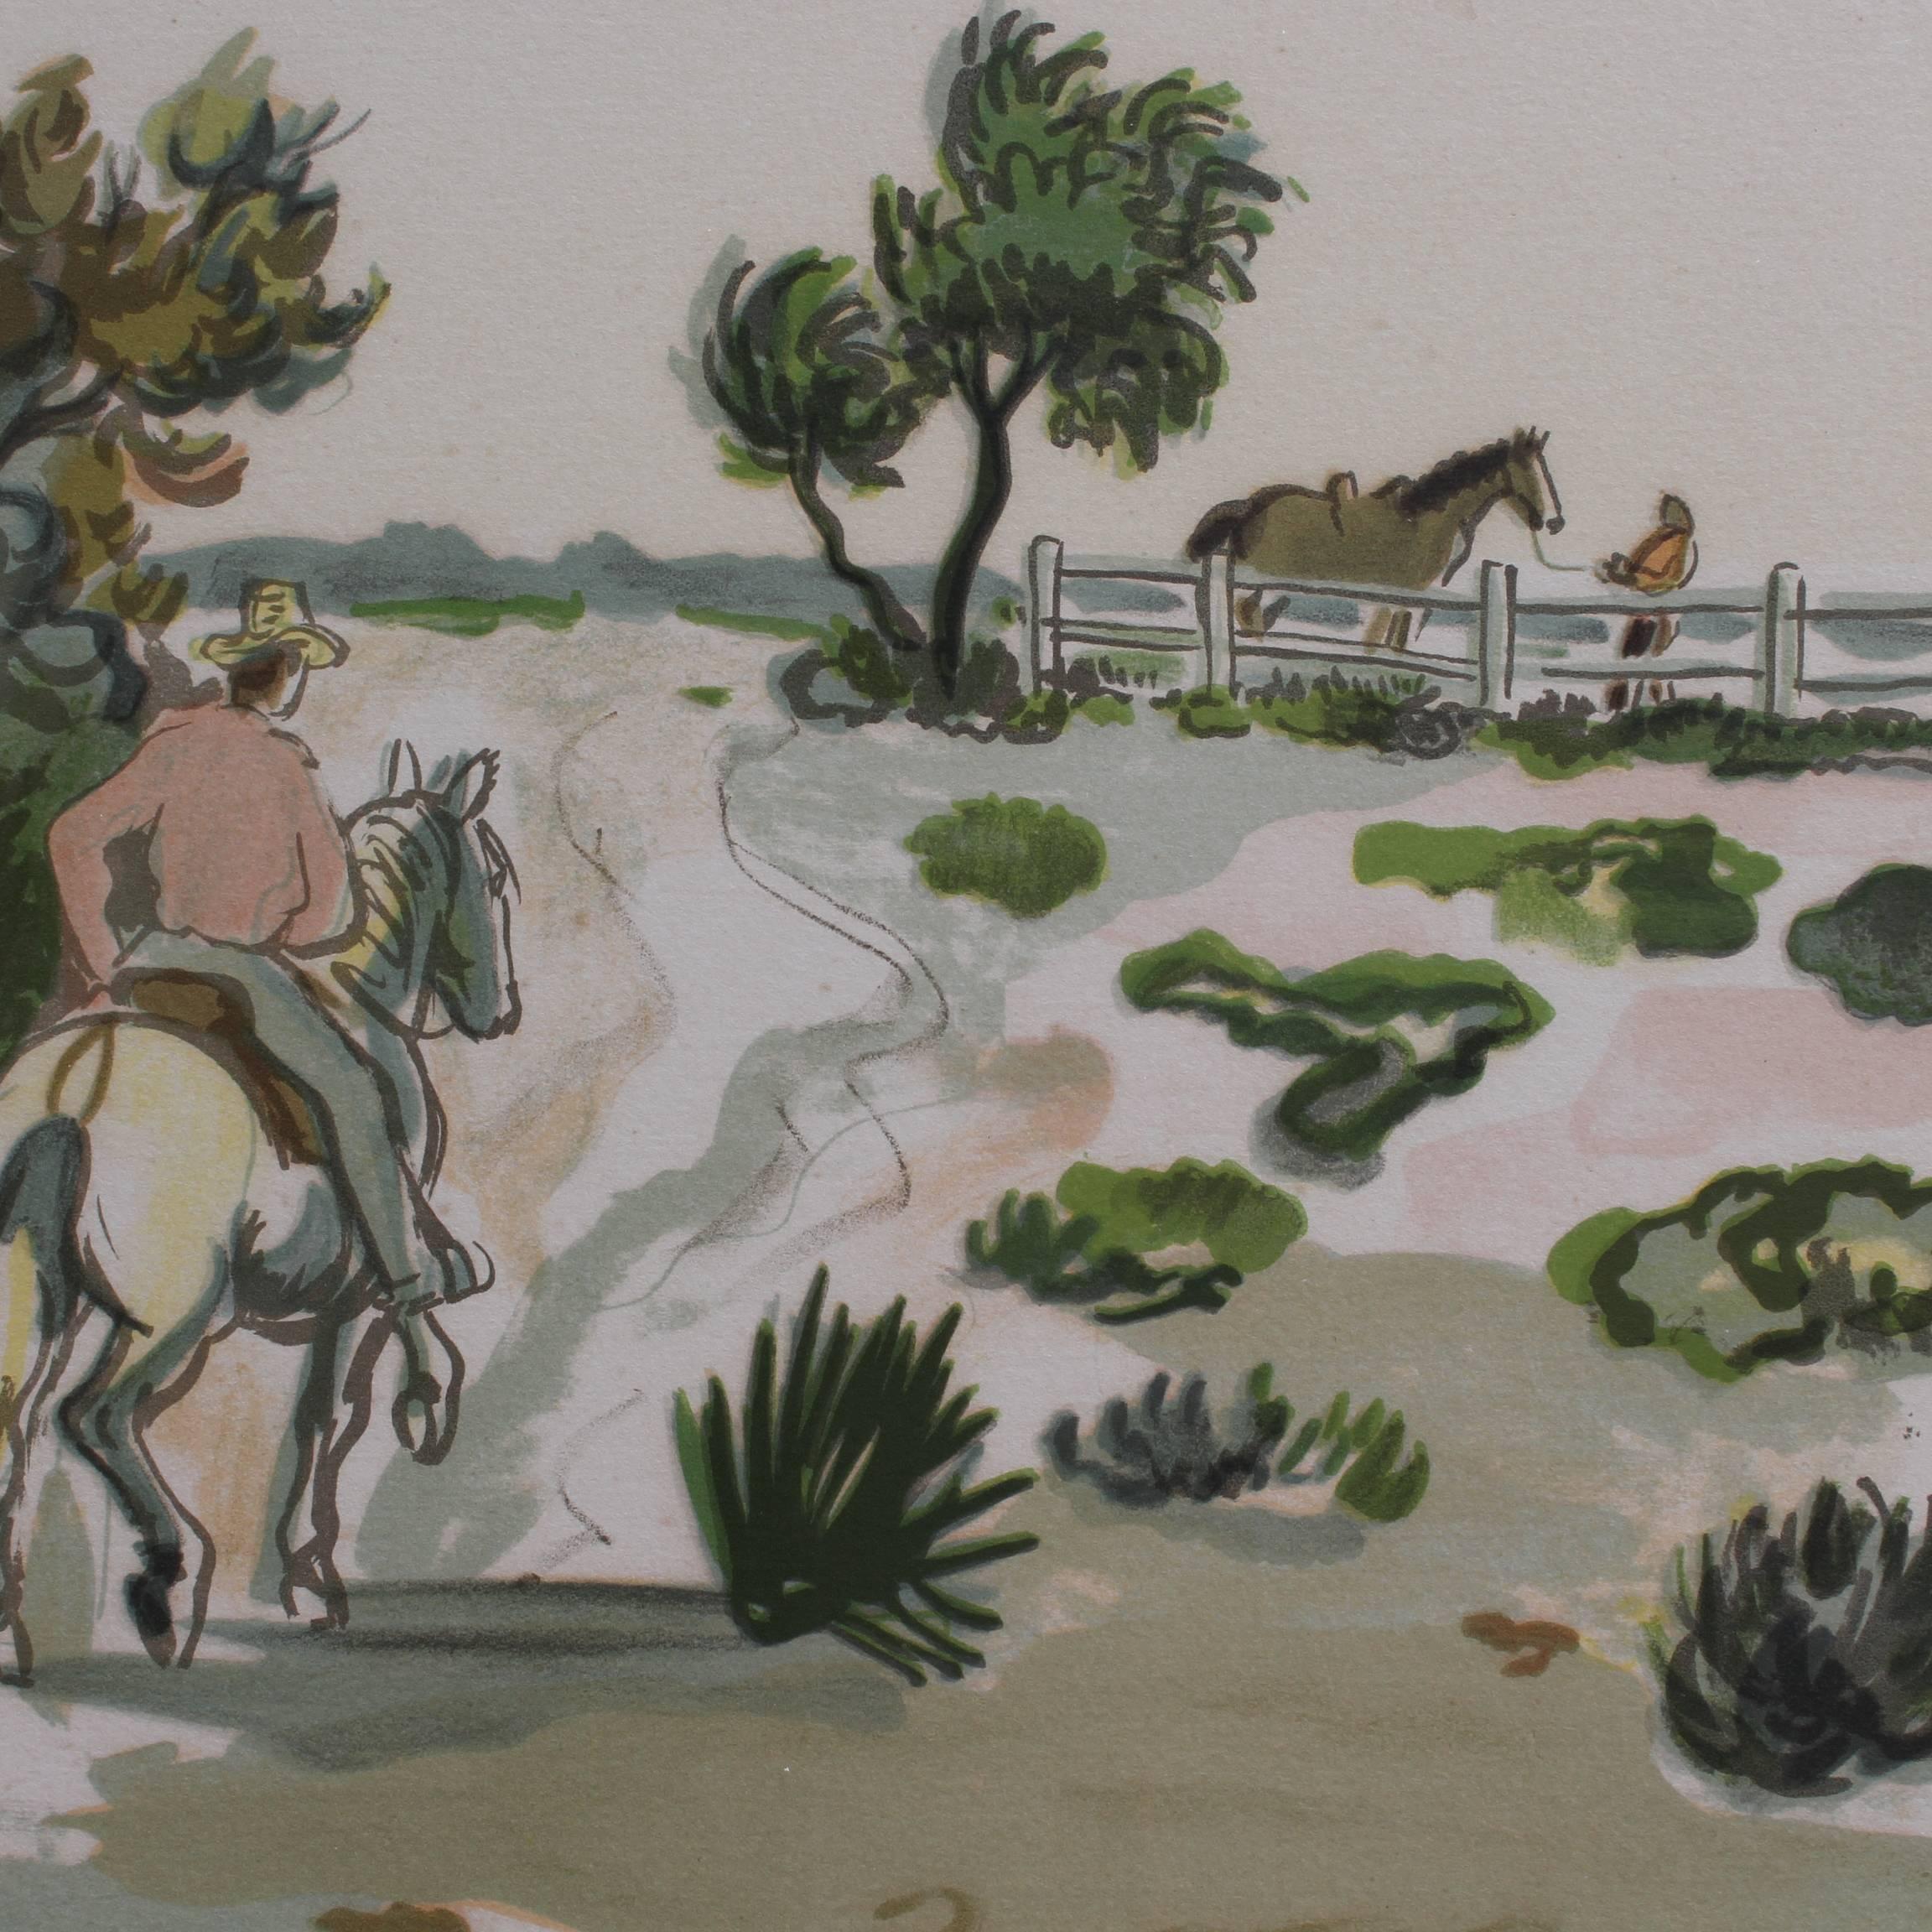 'La Cabane Gardianne', lithograph (1974), by Yves Brayer (1907 - 1990). Brayer loved the Camargue region of France and painted it widely. The Carmargue is a vast, swampy delta near Arles, very exotic, with tall marsh grasses where pink flamingos,